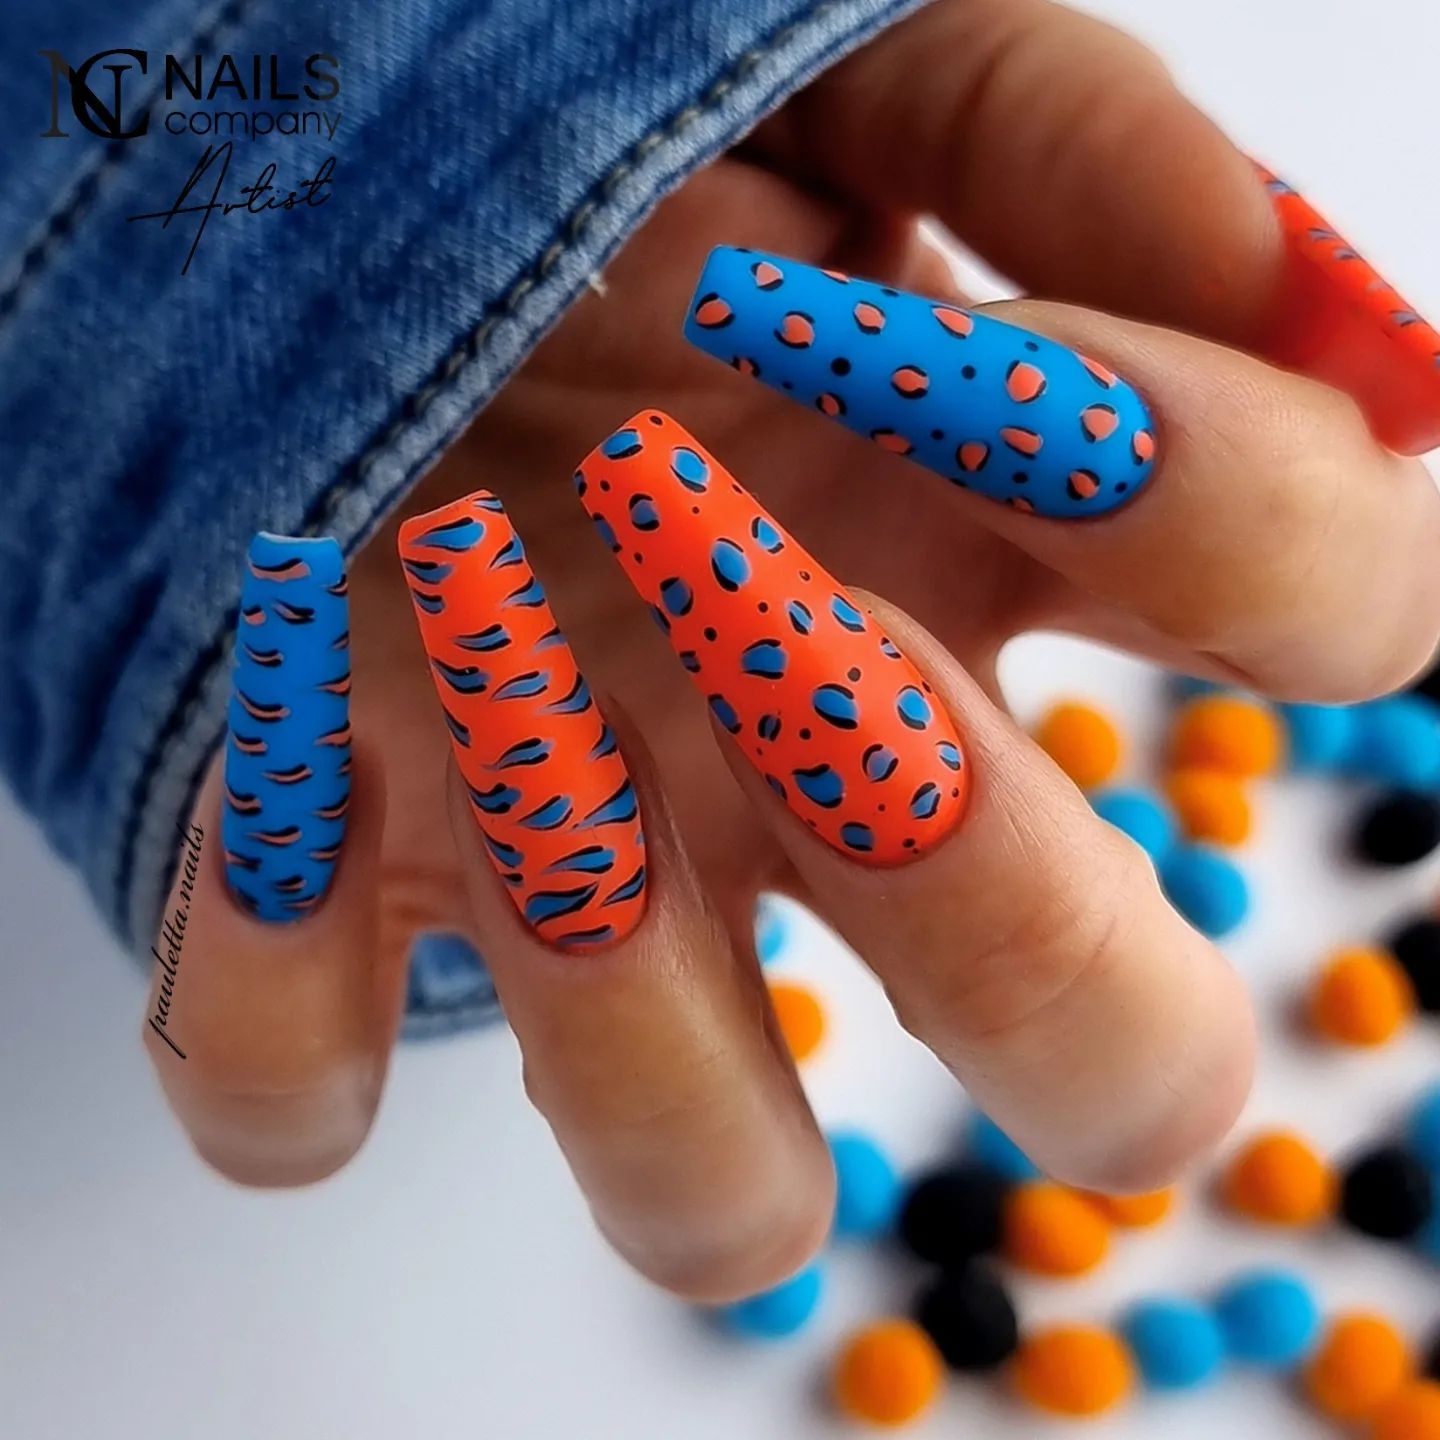 To show your savage side to everyone, applying a panther nail art is a great idea. The combination of orange and dark blue will contribute a lot to your savage look.